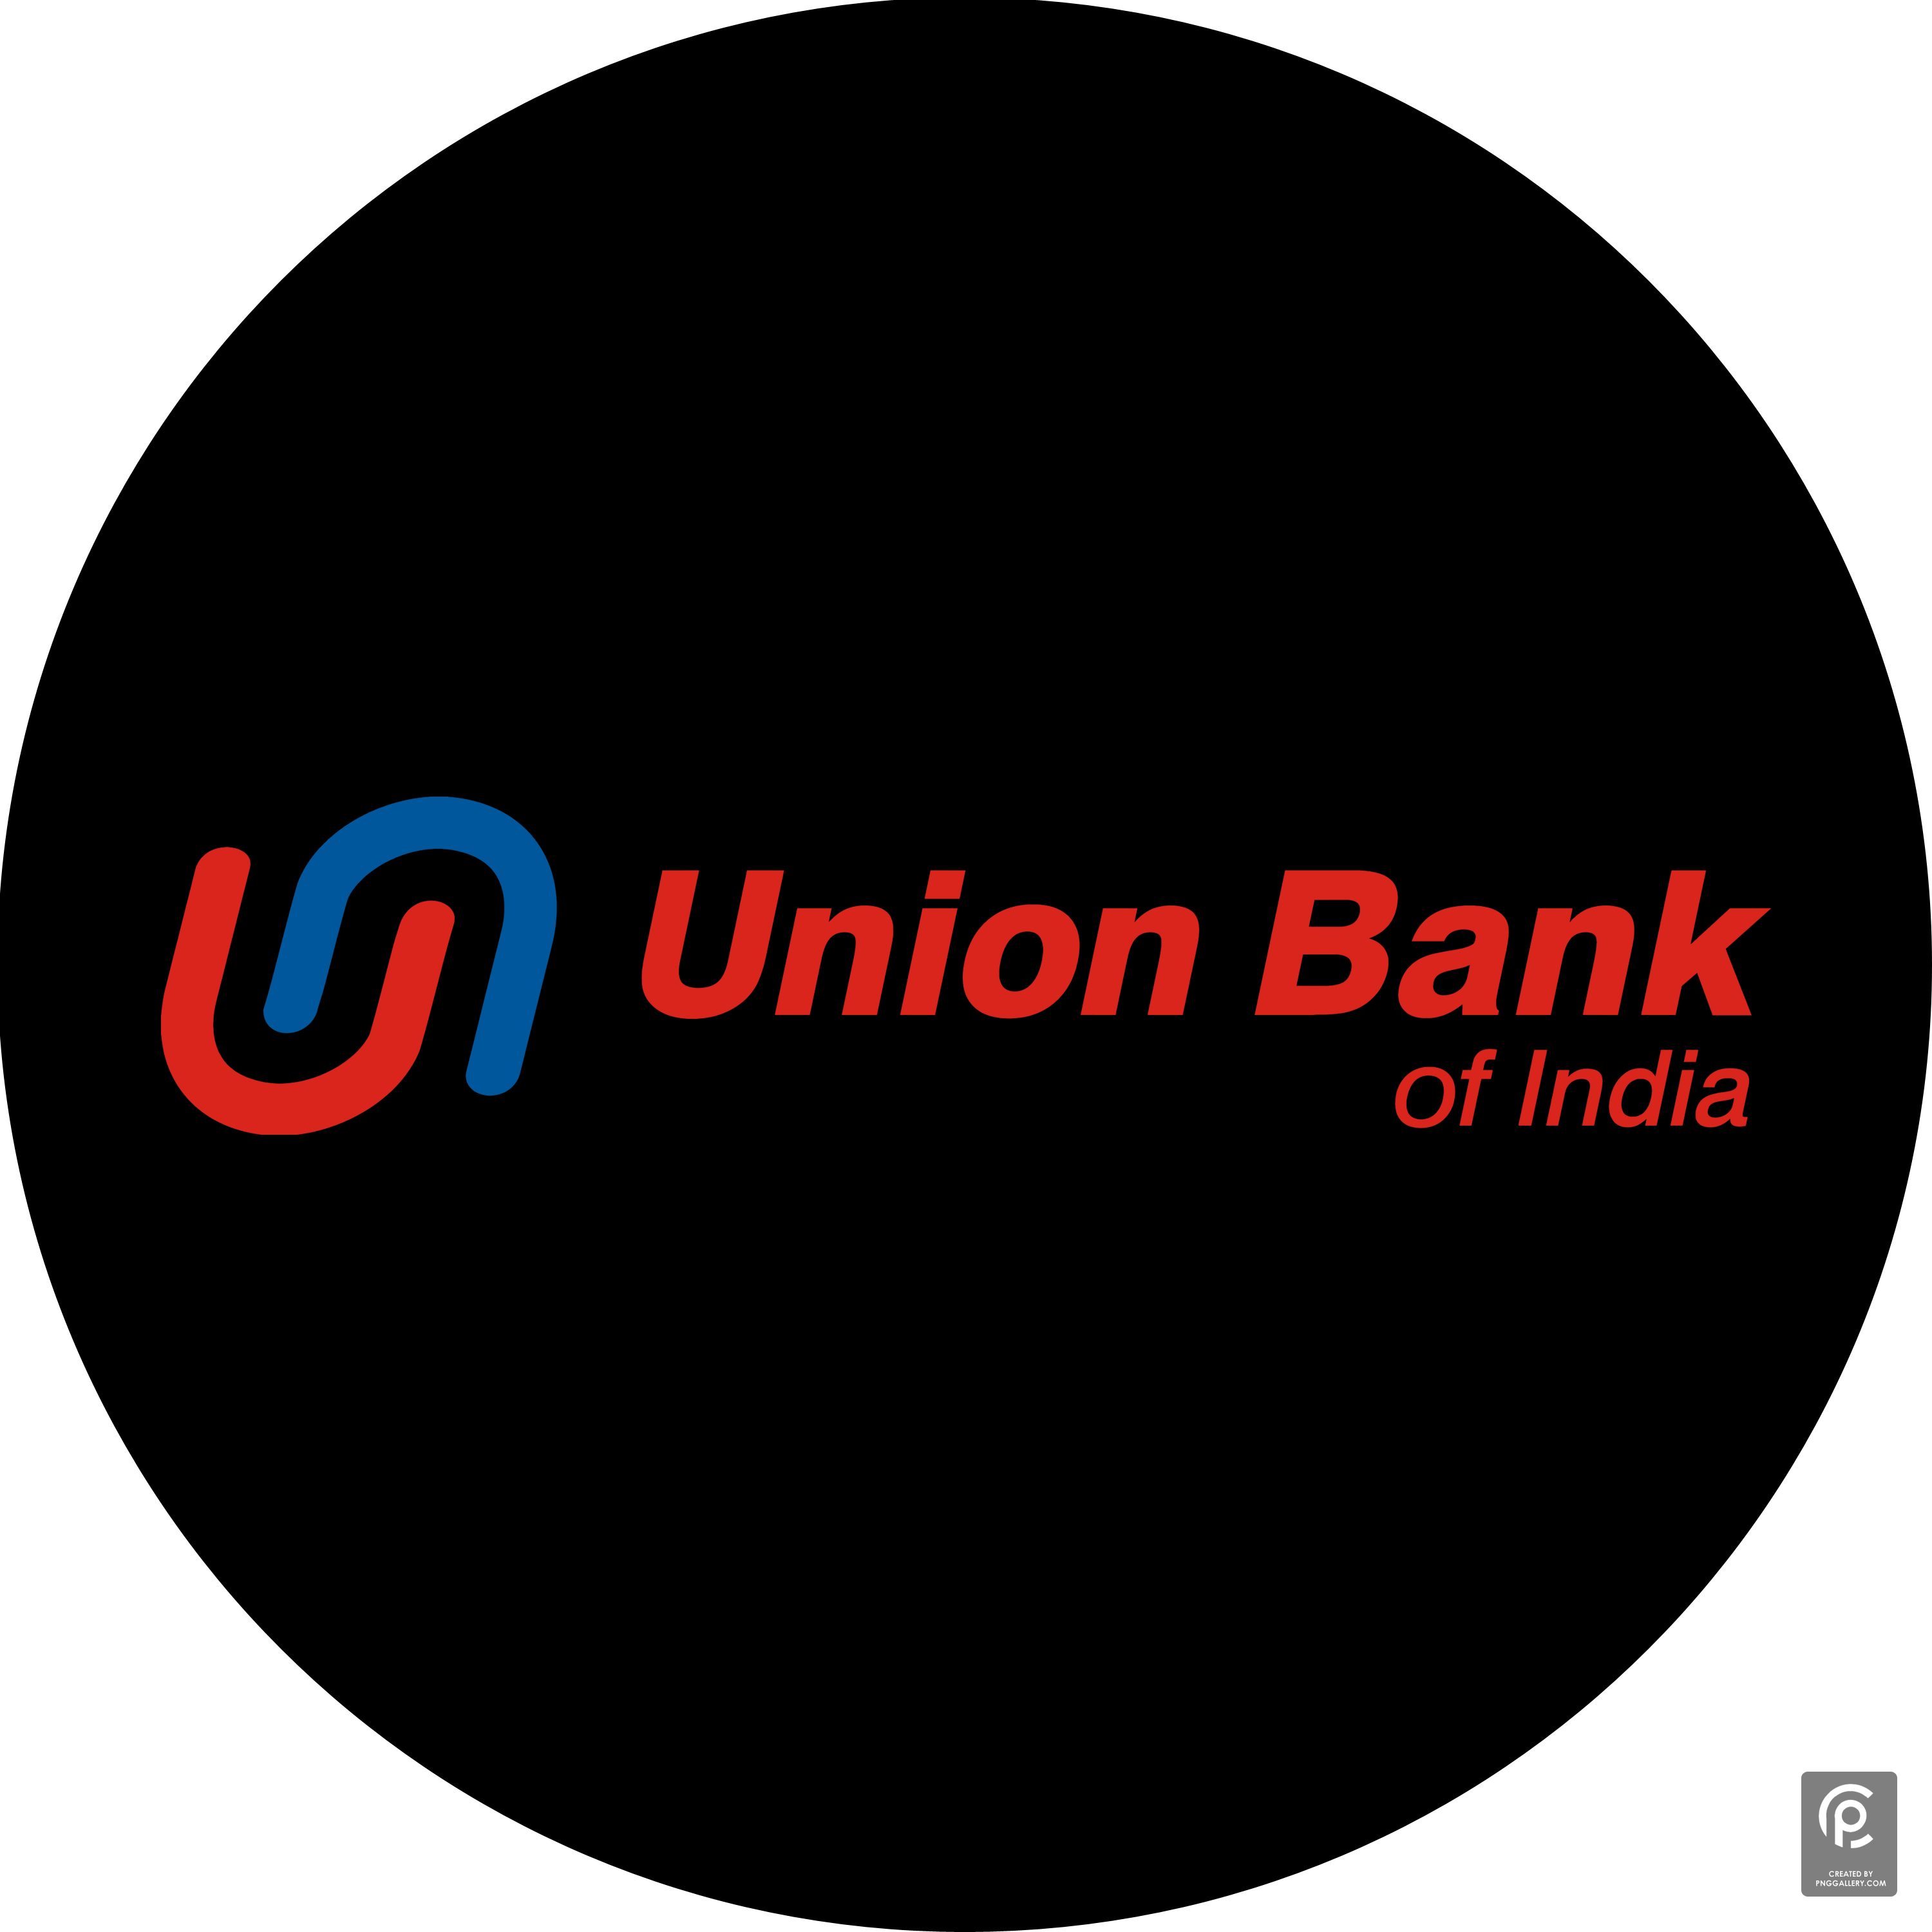 Union Bank Of India Logo Transparent Gallery